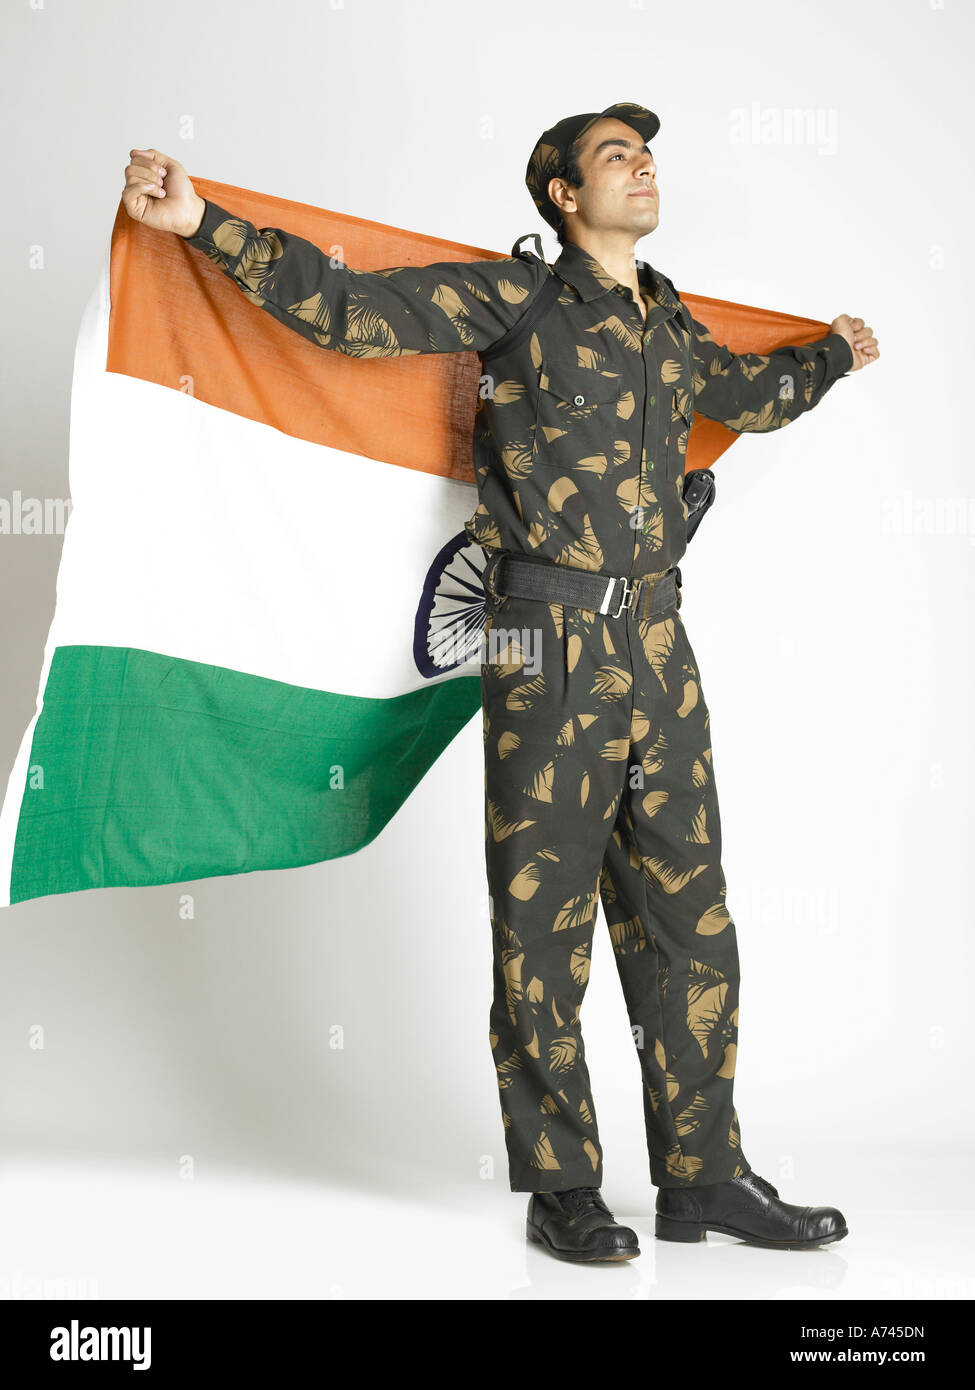 PORTRAIT OF INDIAN SOLDIER DRESSED IN UNIFORM Stock Photo - Alamy